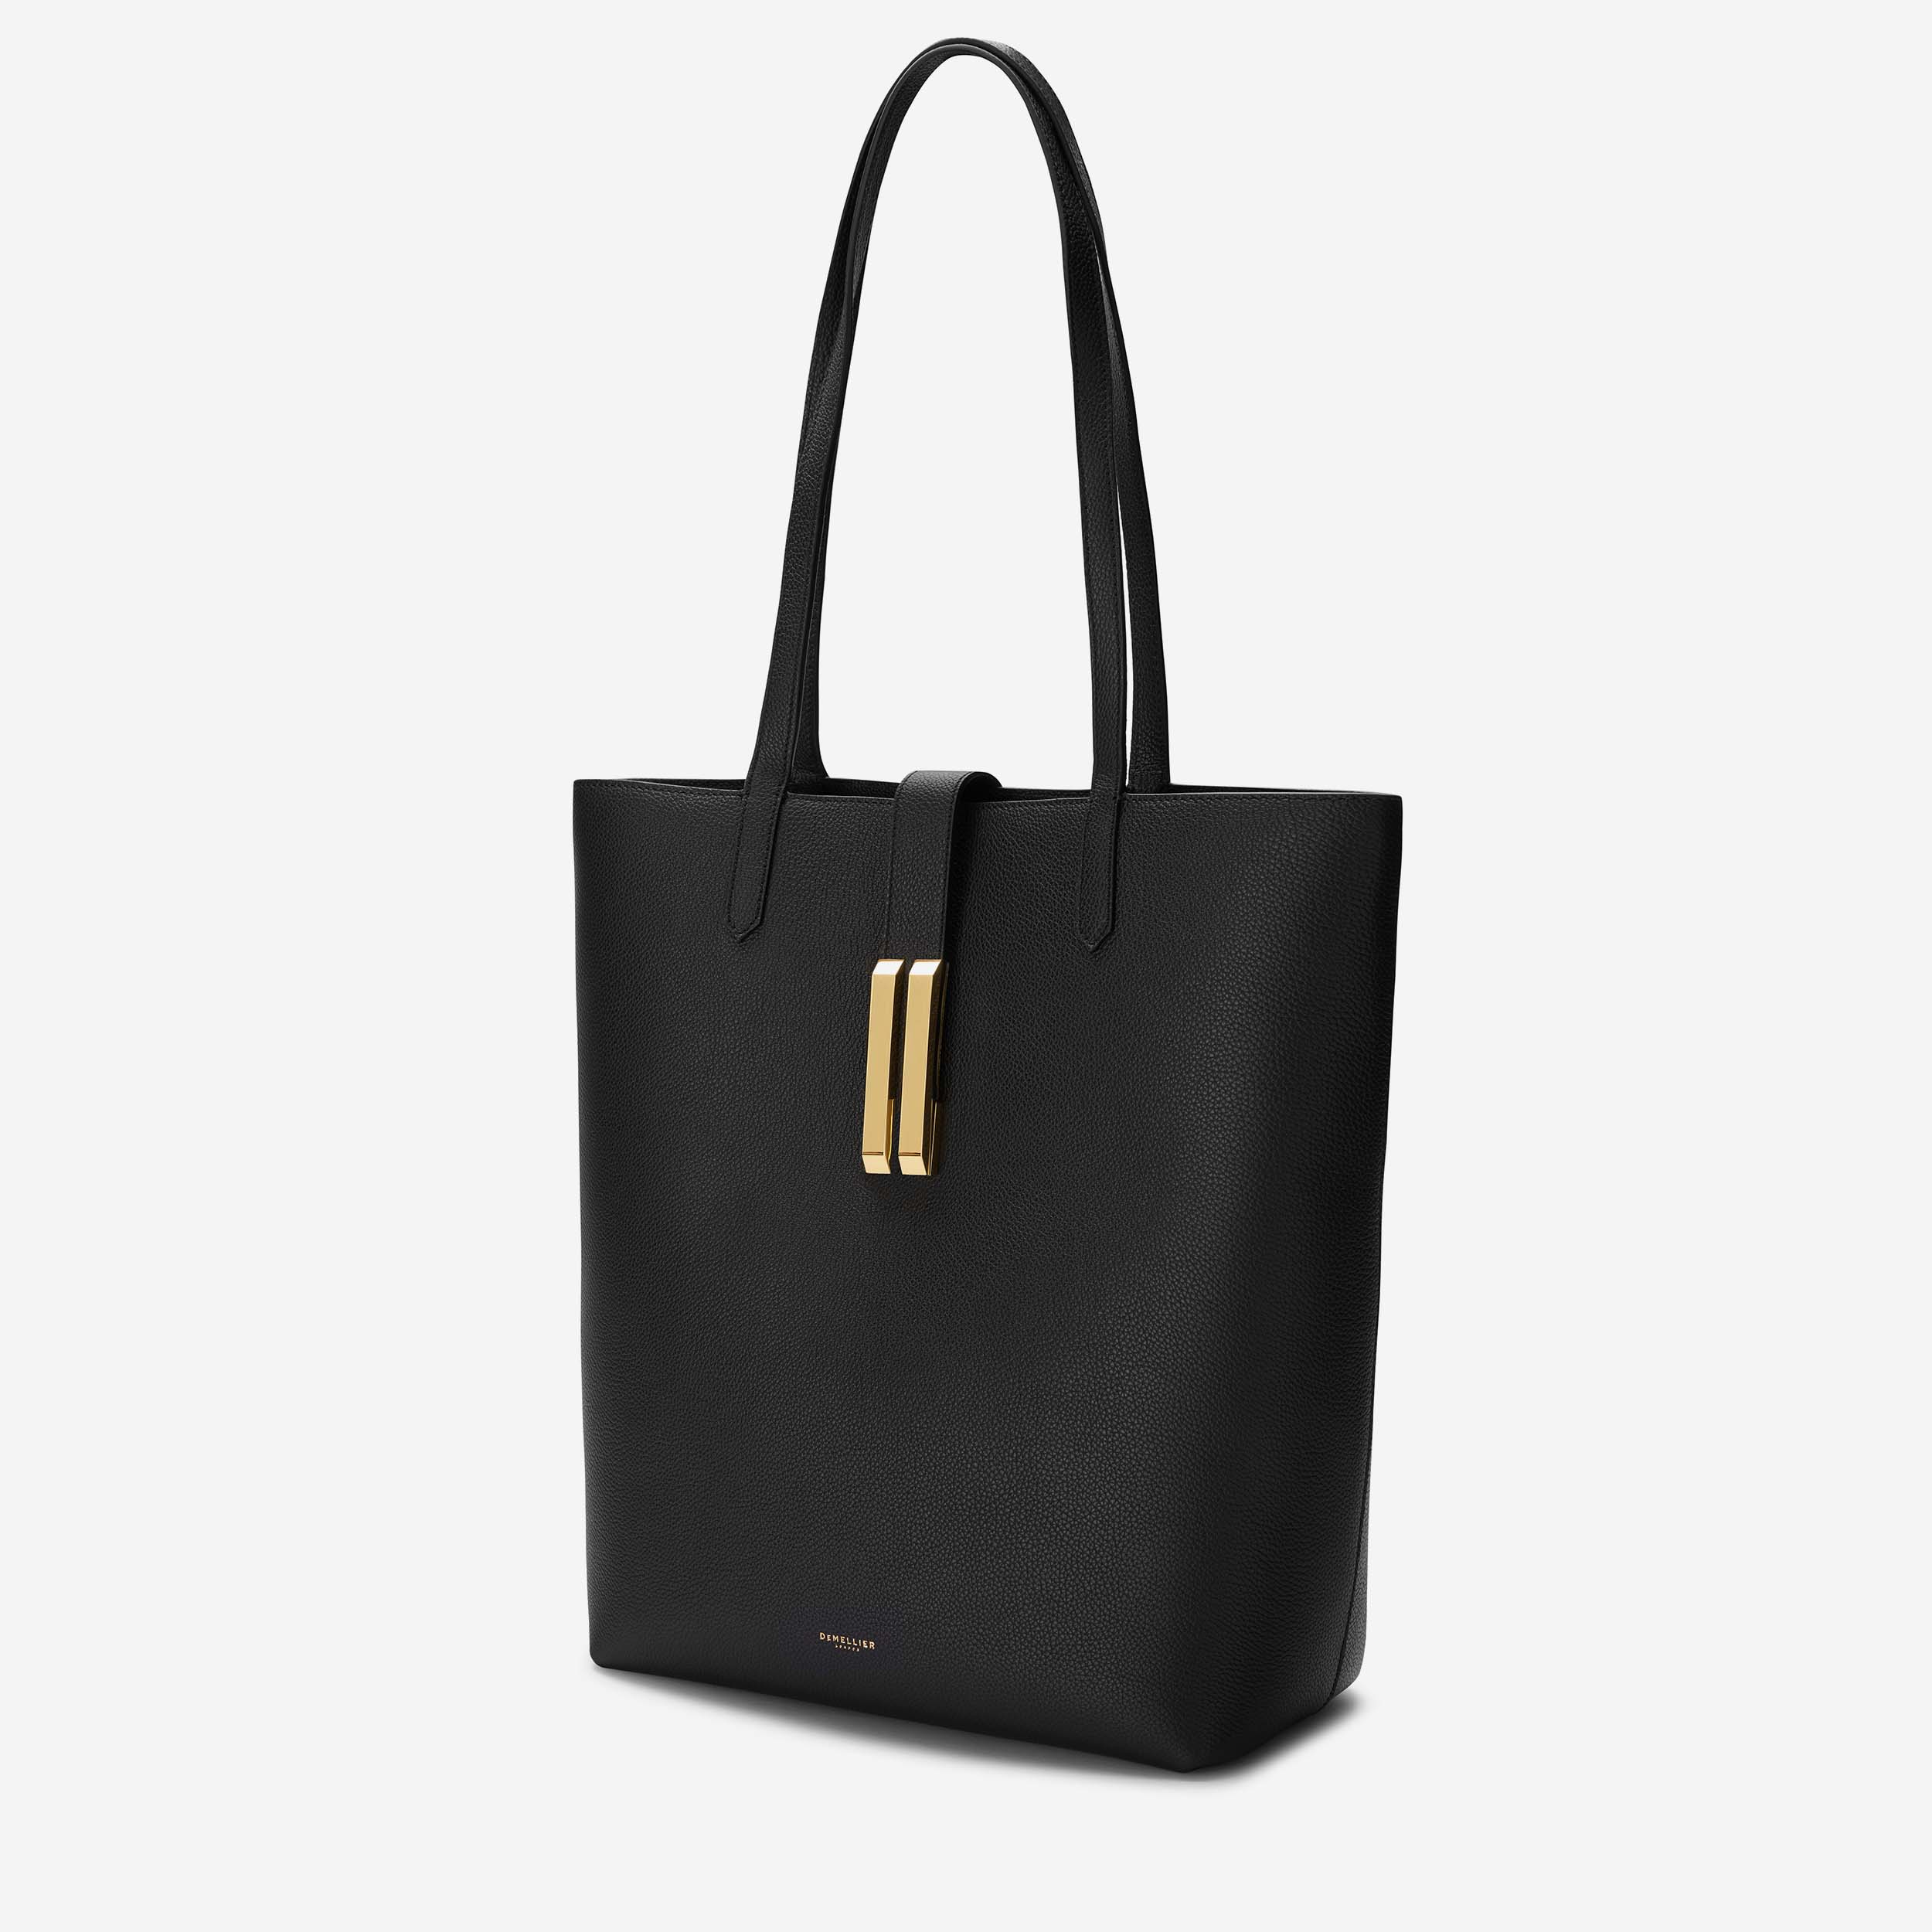 Buy Pettata Chic Top Handle Bag for Women Small Ruched Hobo Handbag Black  Soft Faux Leather Tote Bags Purse at Amazon.in